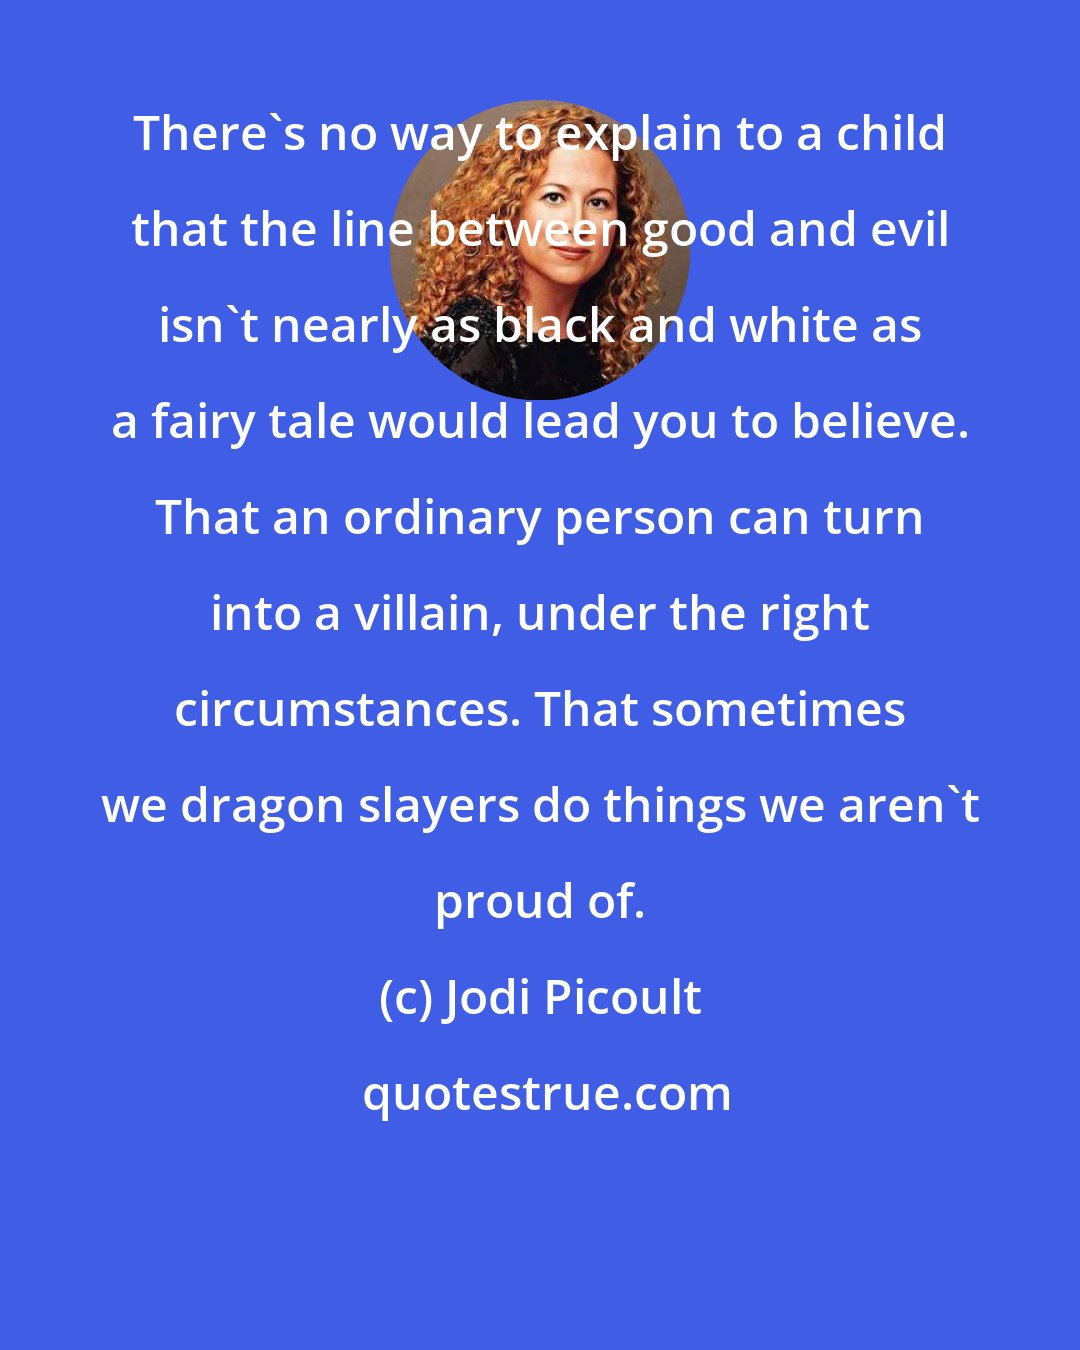 Jodi Picoult: There's no way to explain to a child that the line between good and evil isn't nearly as black and white as a fairy tale would lead you to believe. That an ordinary person can turn into a villain, under the right circumstances. That sometimes we dragon slayers do things we aren't proud of.